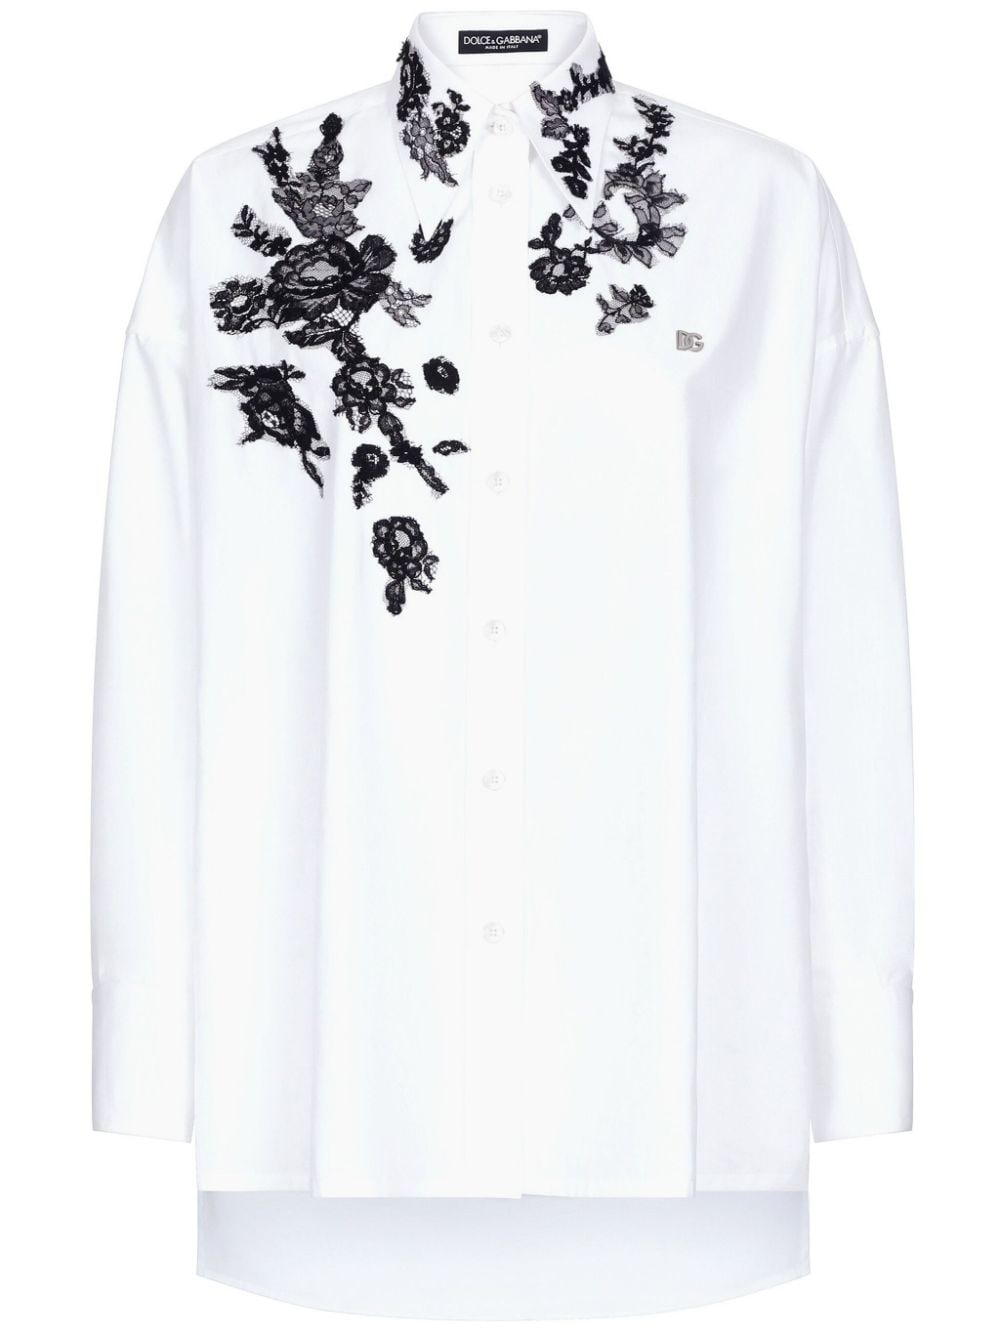 floral-lace long-sleeve shirt